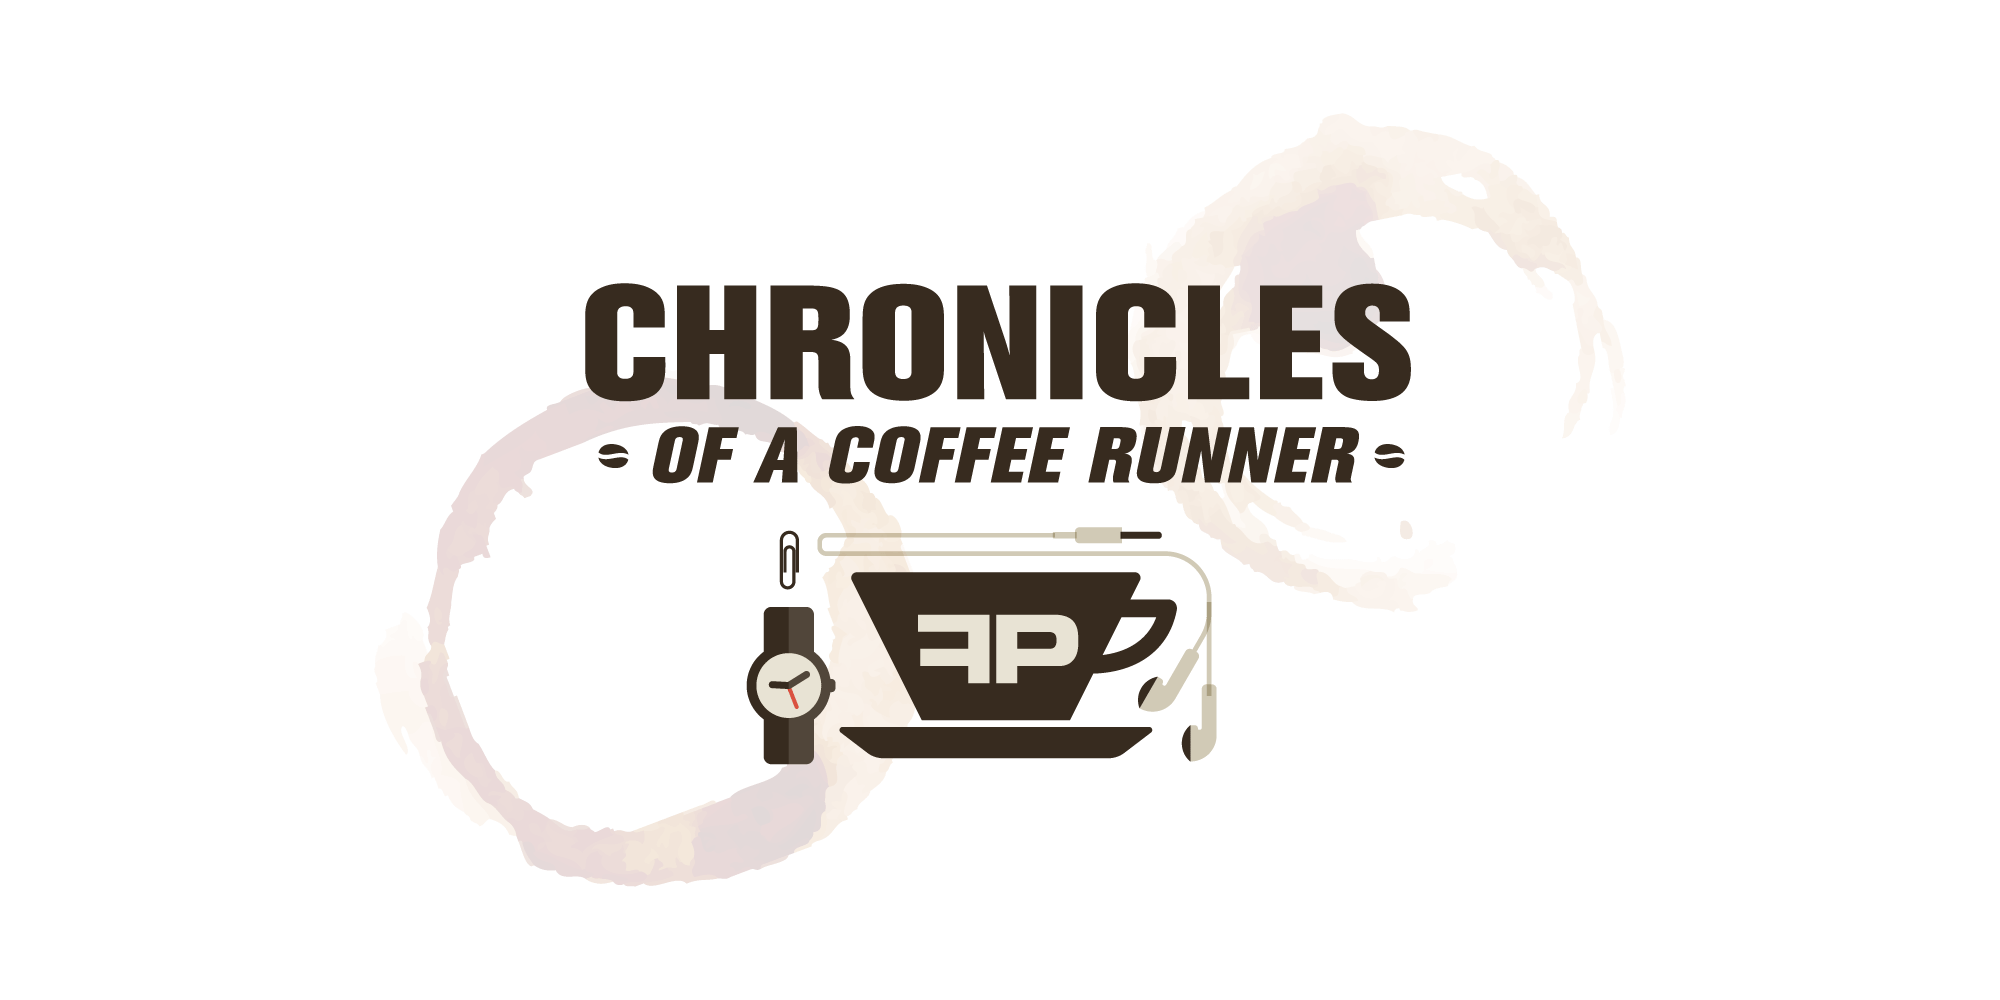 coffeerunner blog header - The Chronicles of a Coffee Runner: The Focal Point Summer Intern Series